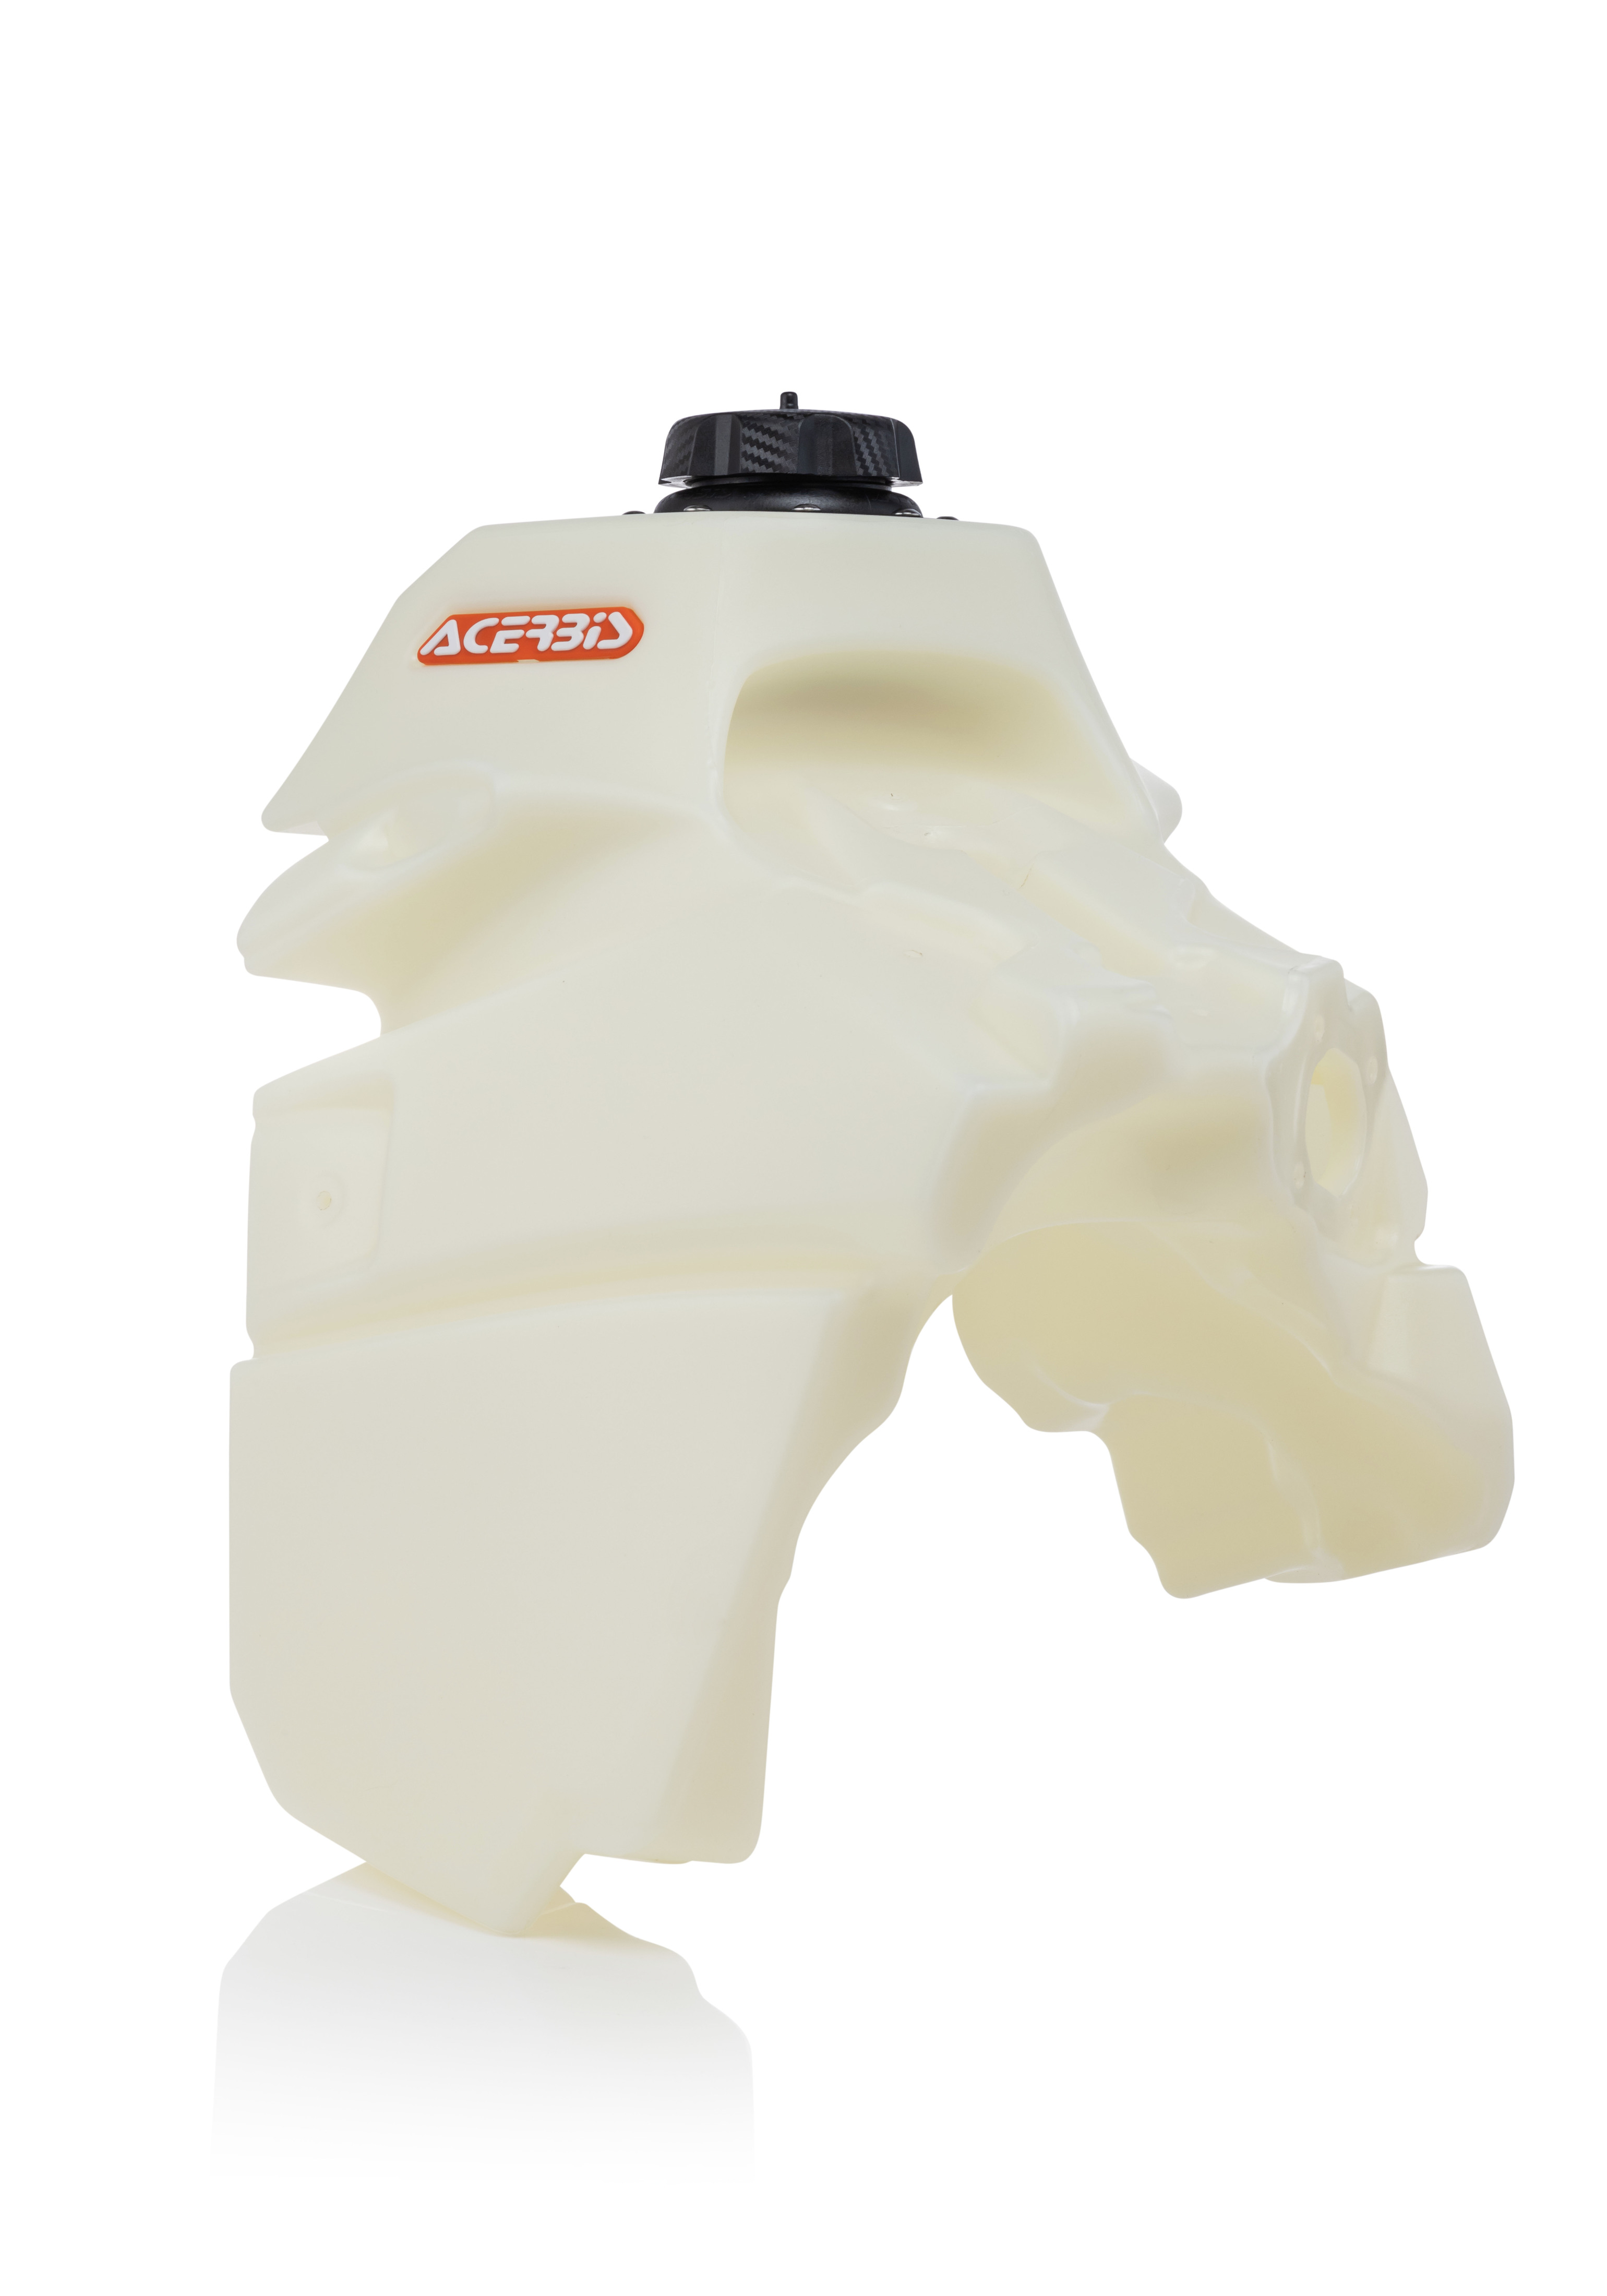 3.1 Gallon Fuel Tank - For 20-22 KTM 250-500 XC/EXC - Click Image to Close